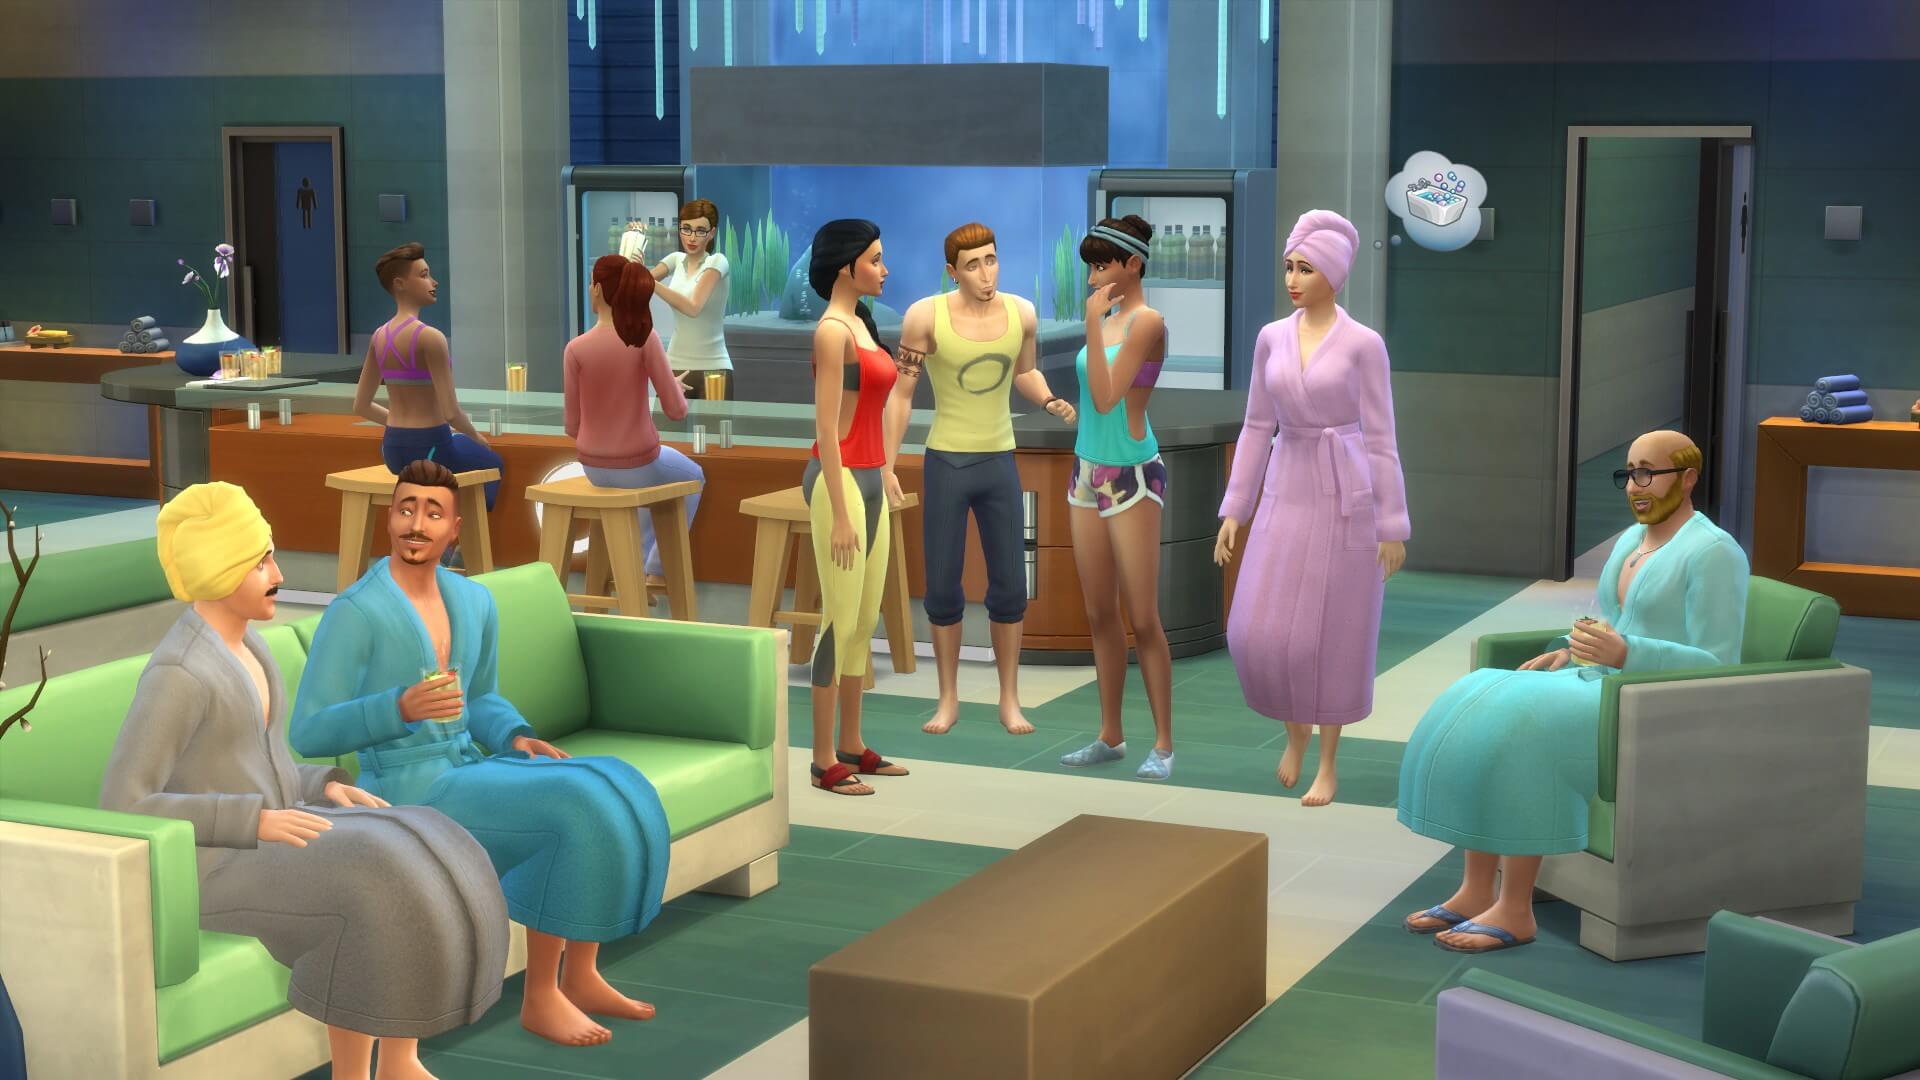 The Sims 4 Spa Day Is Now Available Plus Mouse And Keyboard